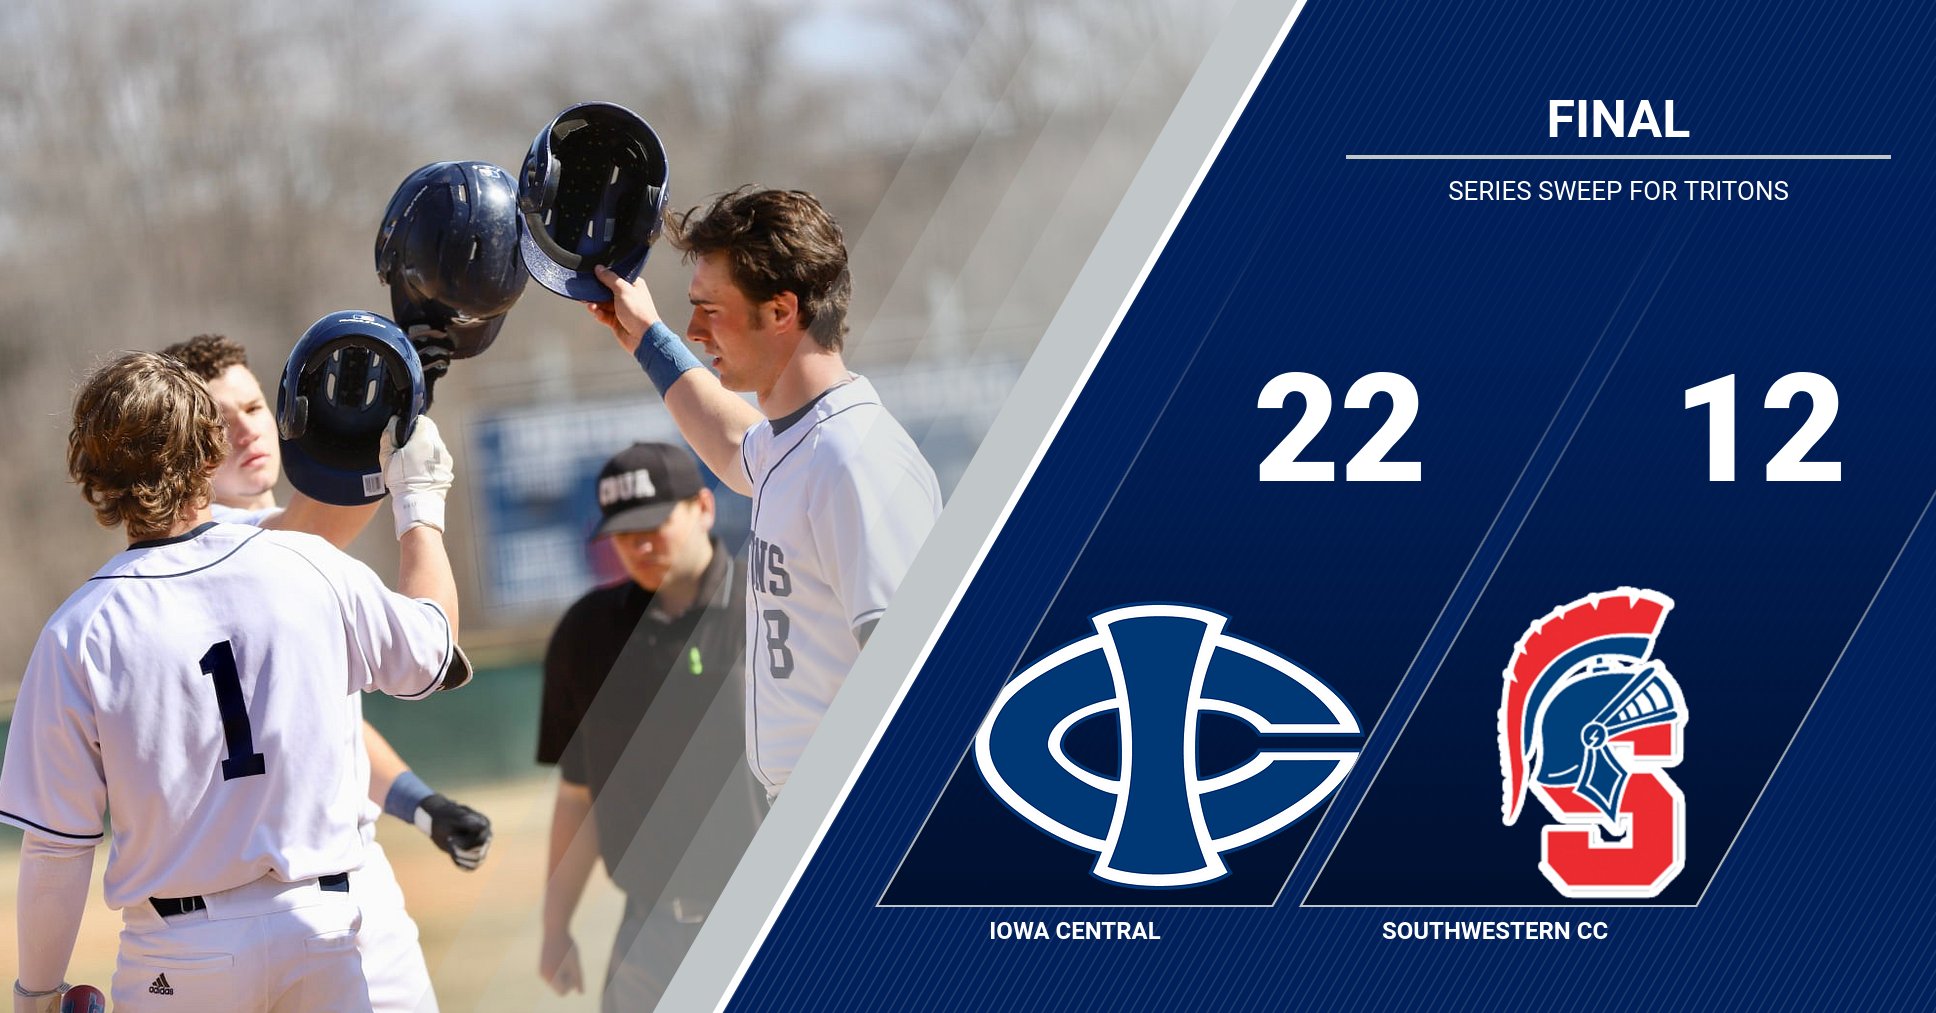 Offense remains hot as Tritons finish sweep